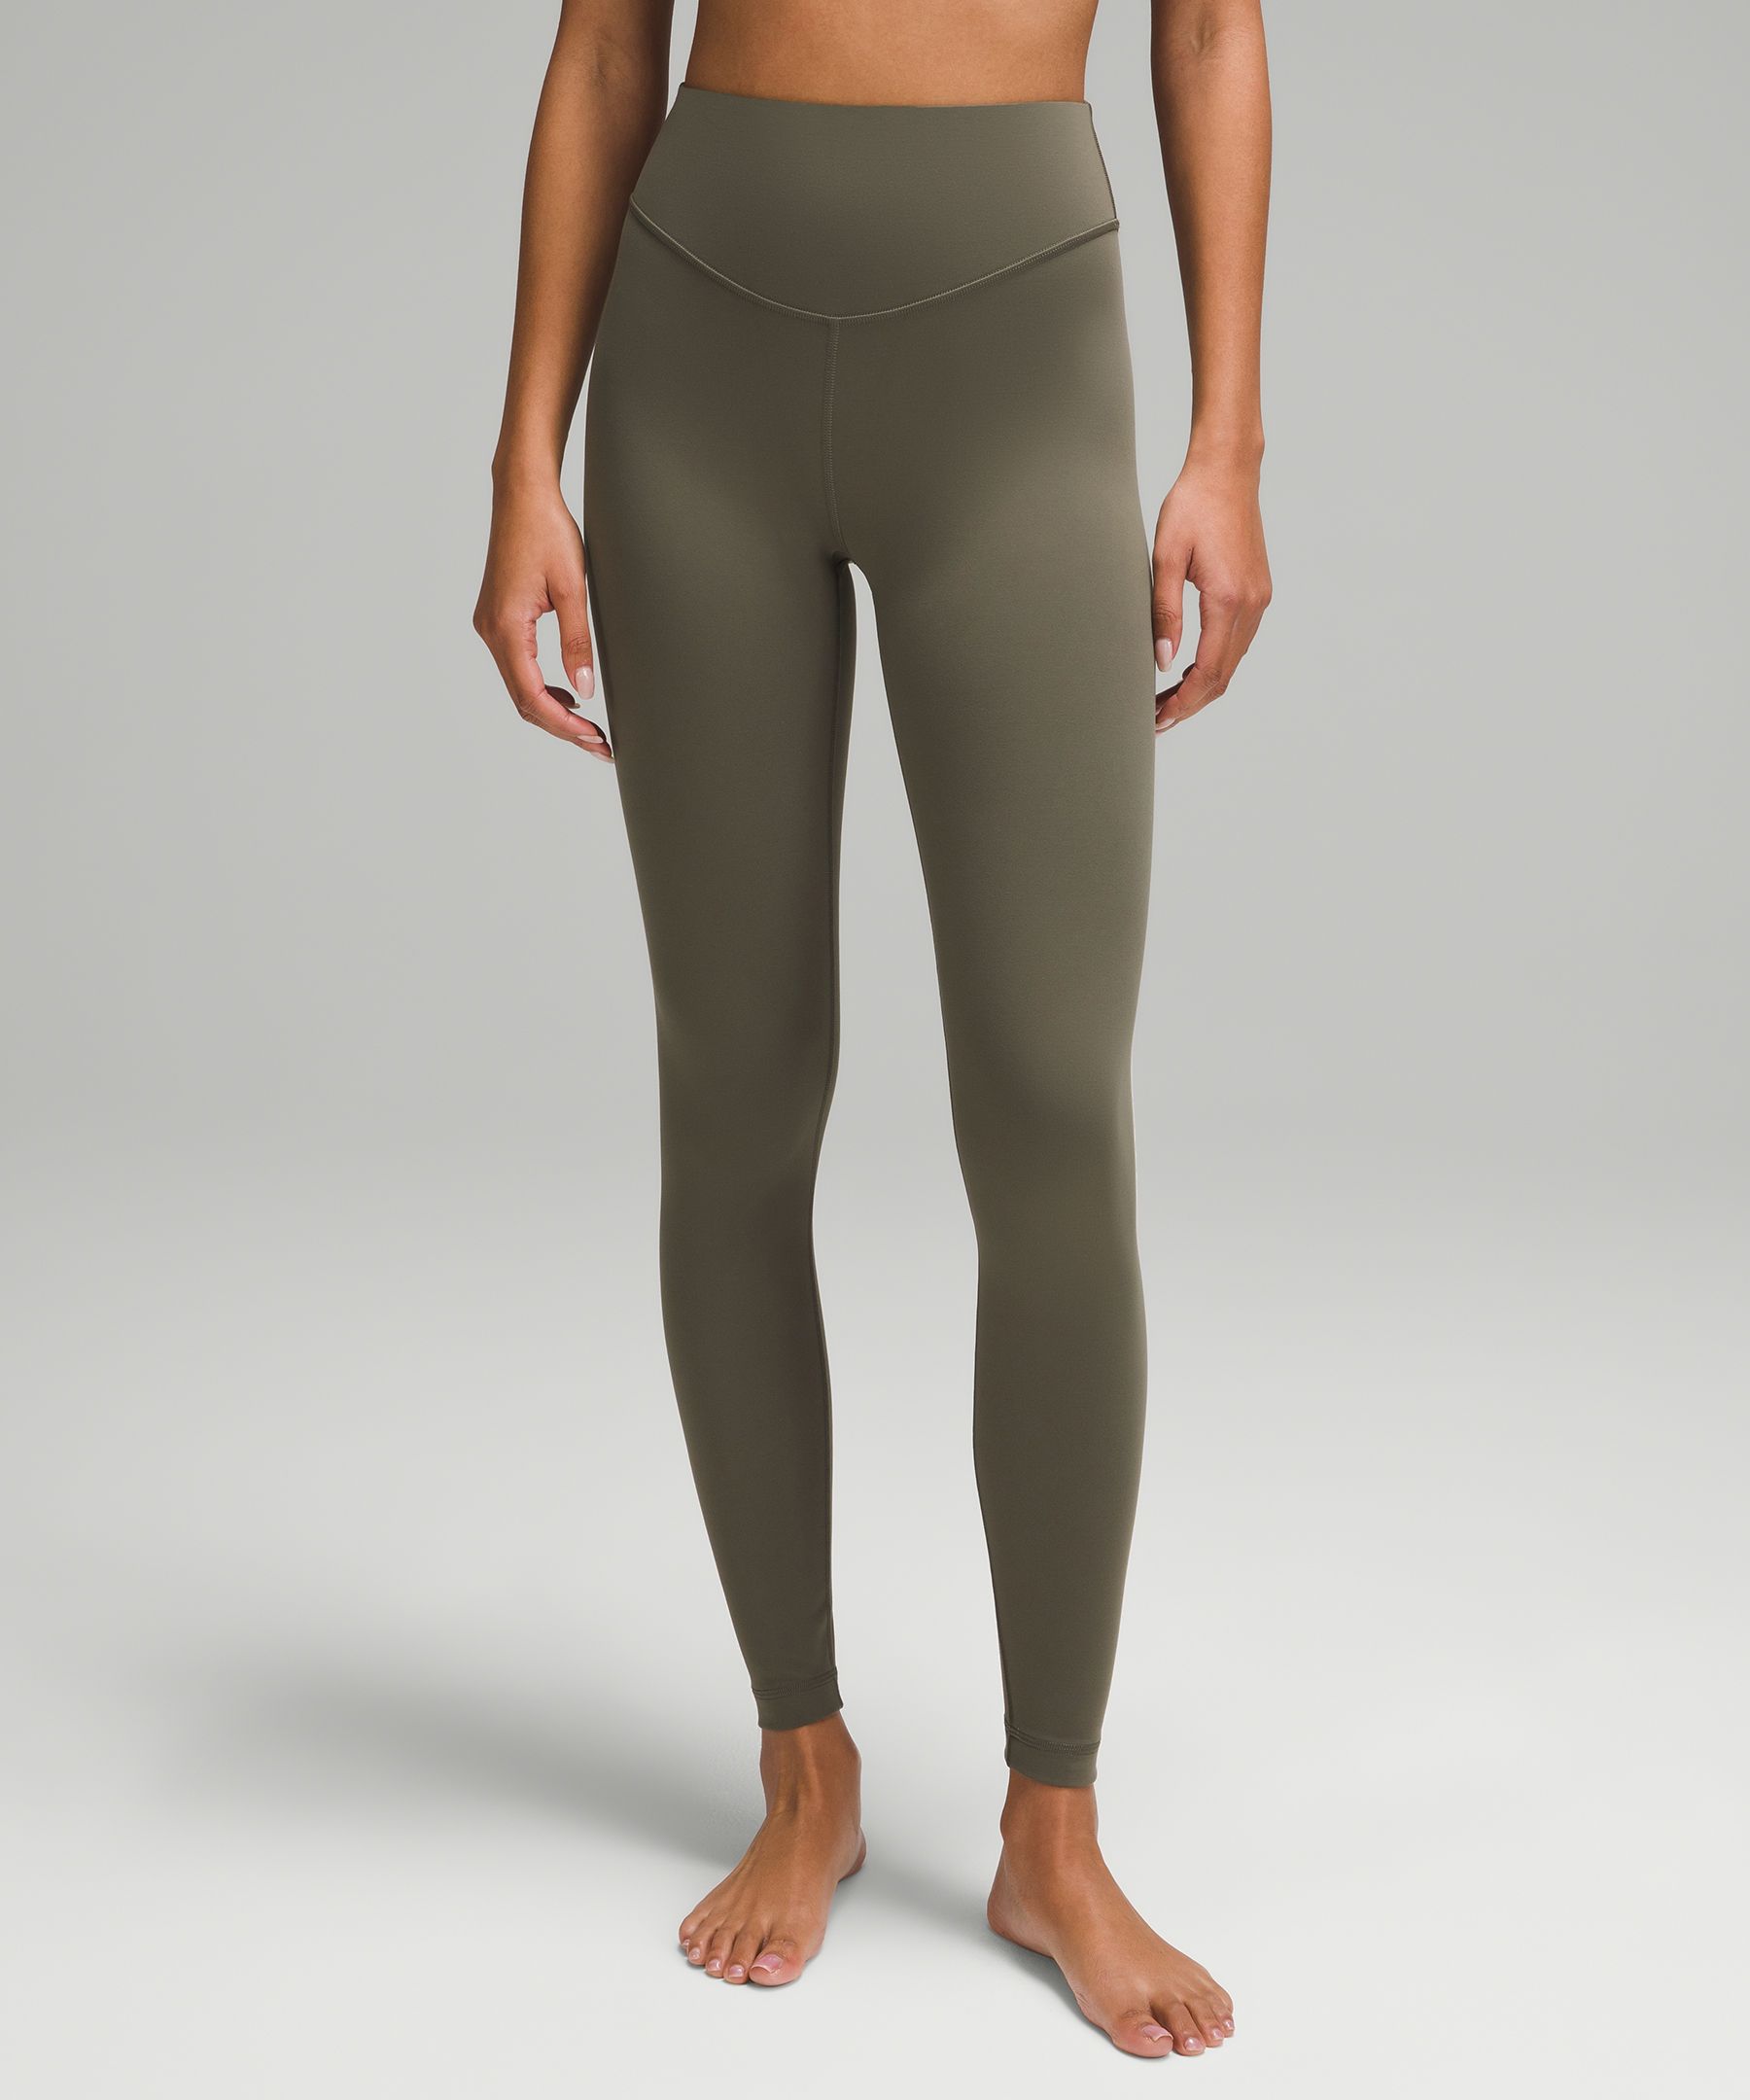 Lululemon athletica Wunder Under SmoothCover High-Rise Tight 28